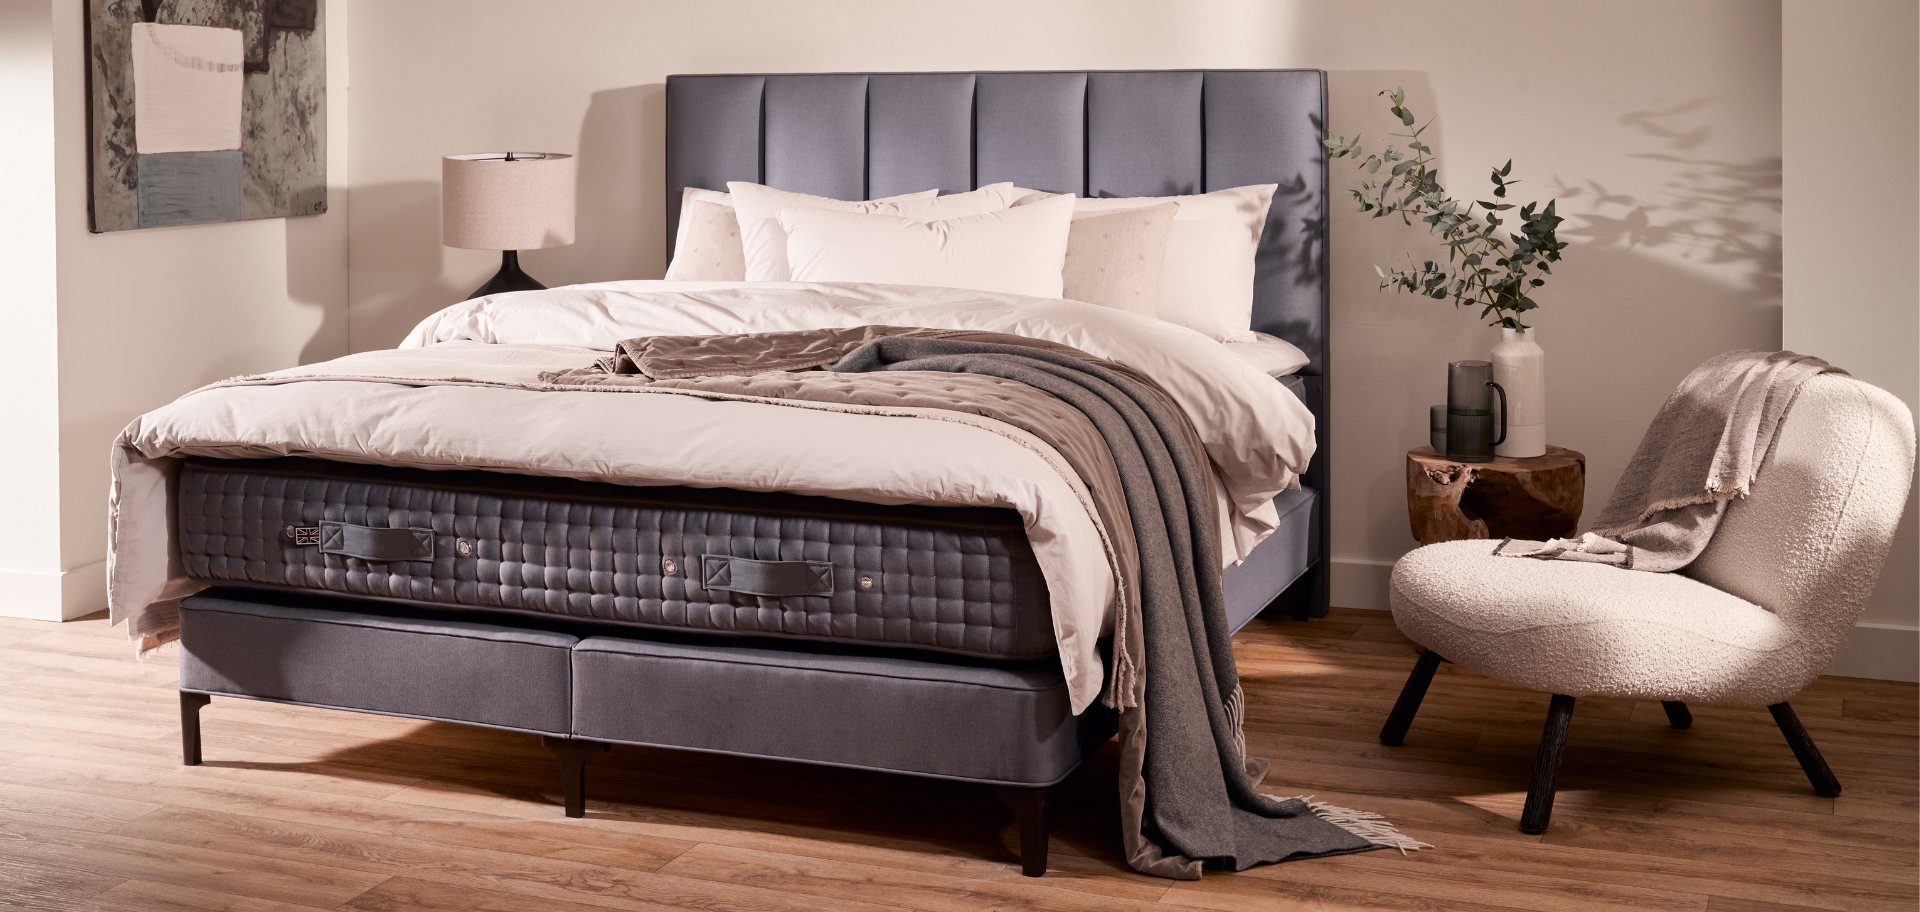 Save 25% Plus FREE Gifts on Vispring, the makers of Luxury Handmade British Beds